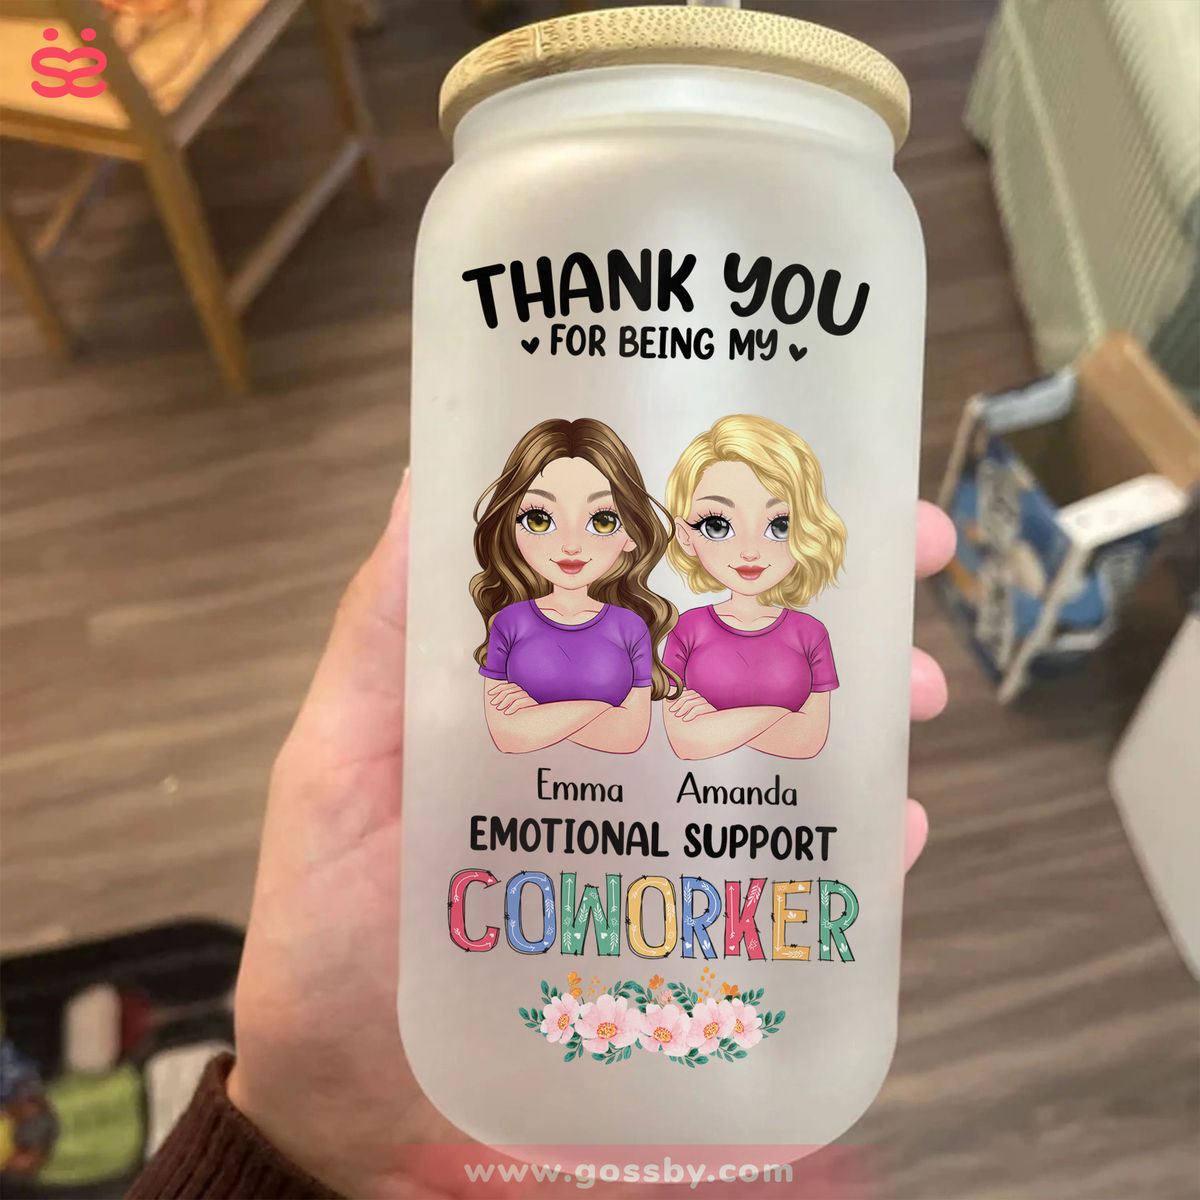 Personalized Tumbler - Personalized Iced Coffee Cup - Pink Dolls - Thanks For Being My Emotional Support (C1) - Gift For Best Friends, BFF, Sisters, Coworkers